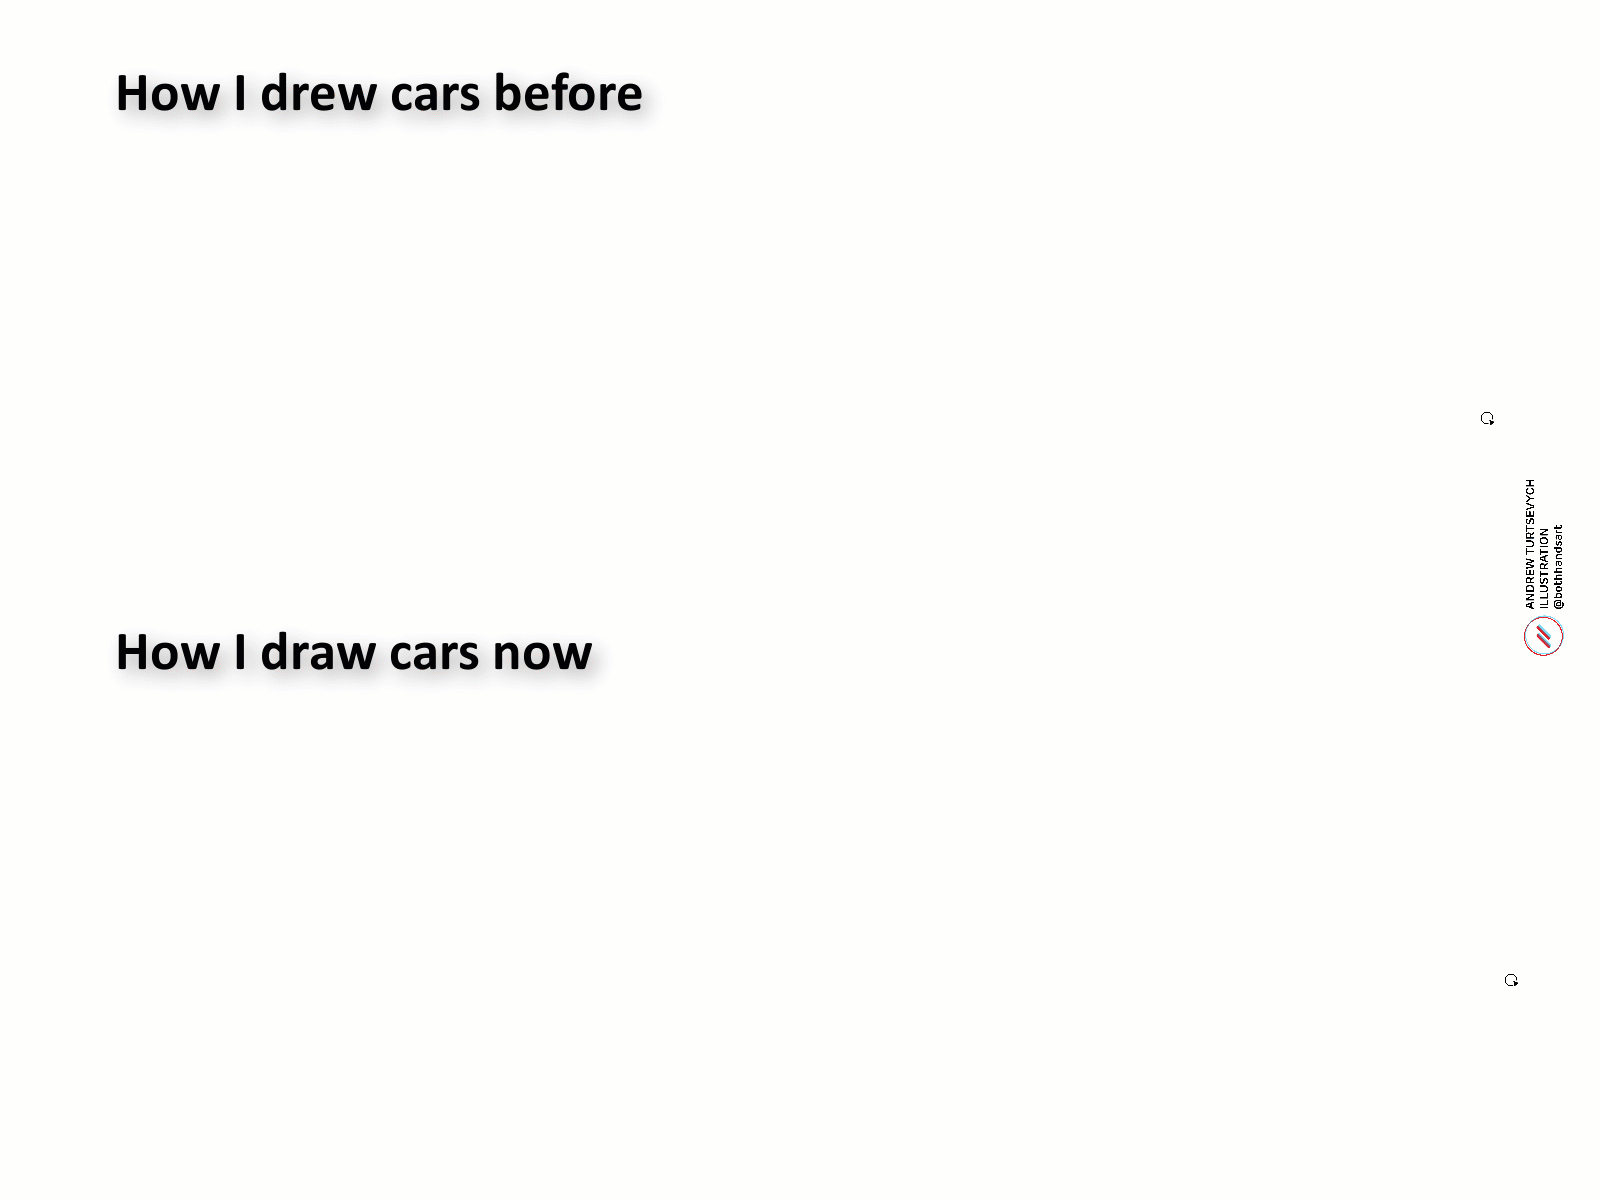 How I drew cars before. How I draw cars now.